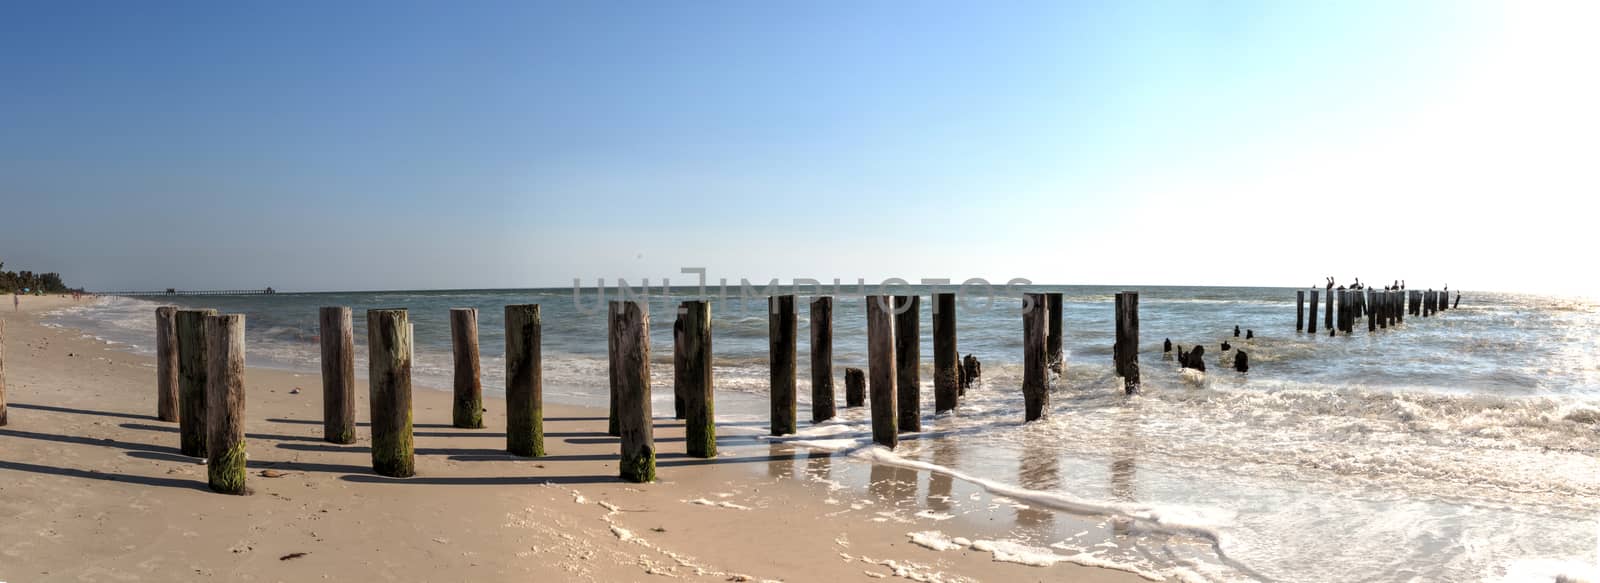 Clear blue sky over the old dilapidated pier on the beach in Naples, Florida